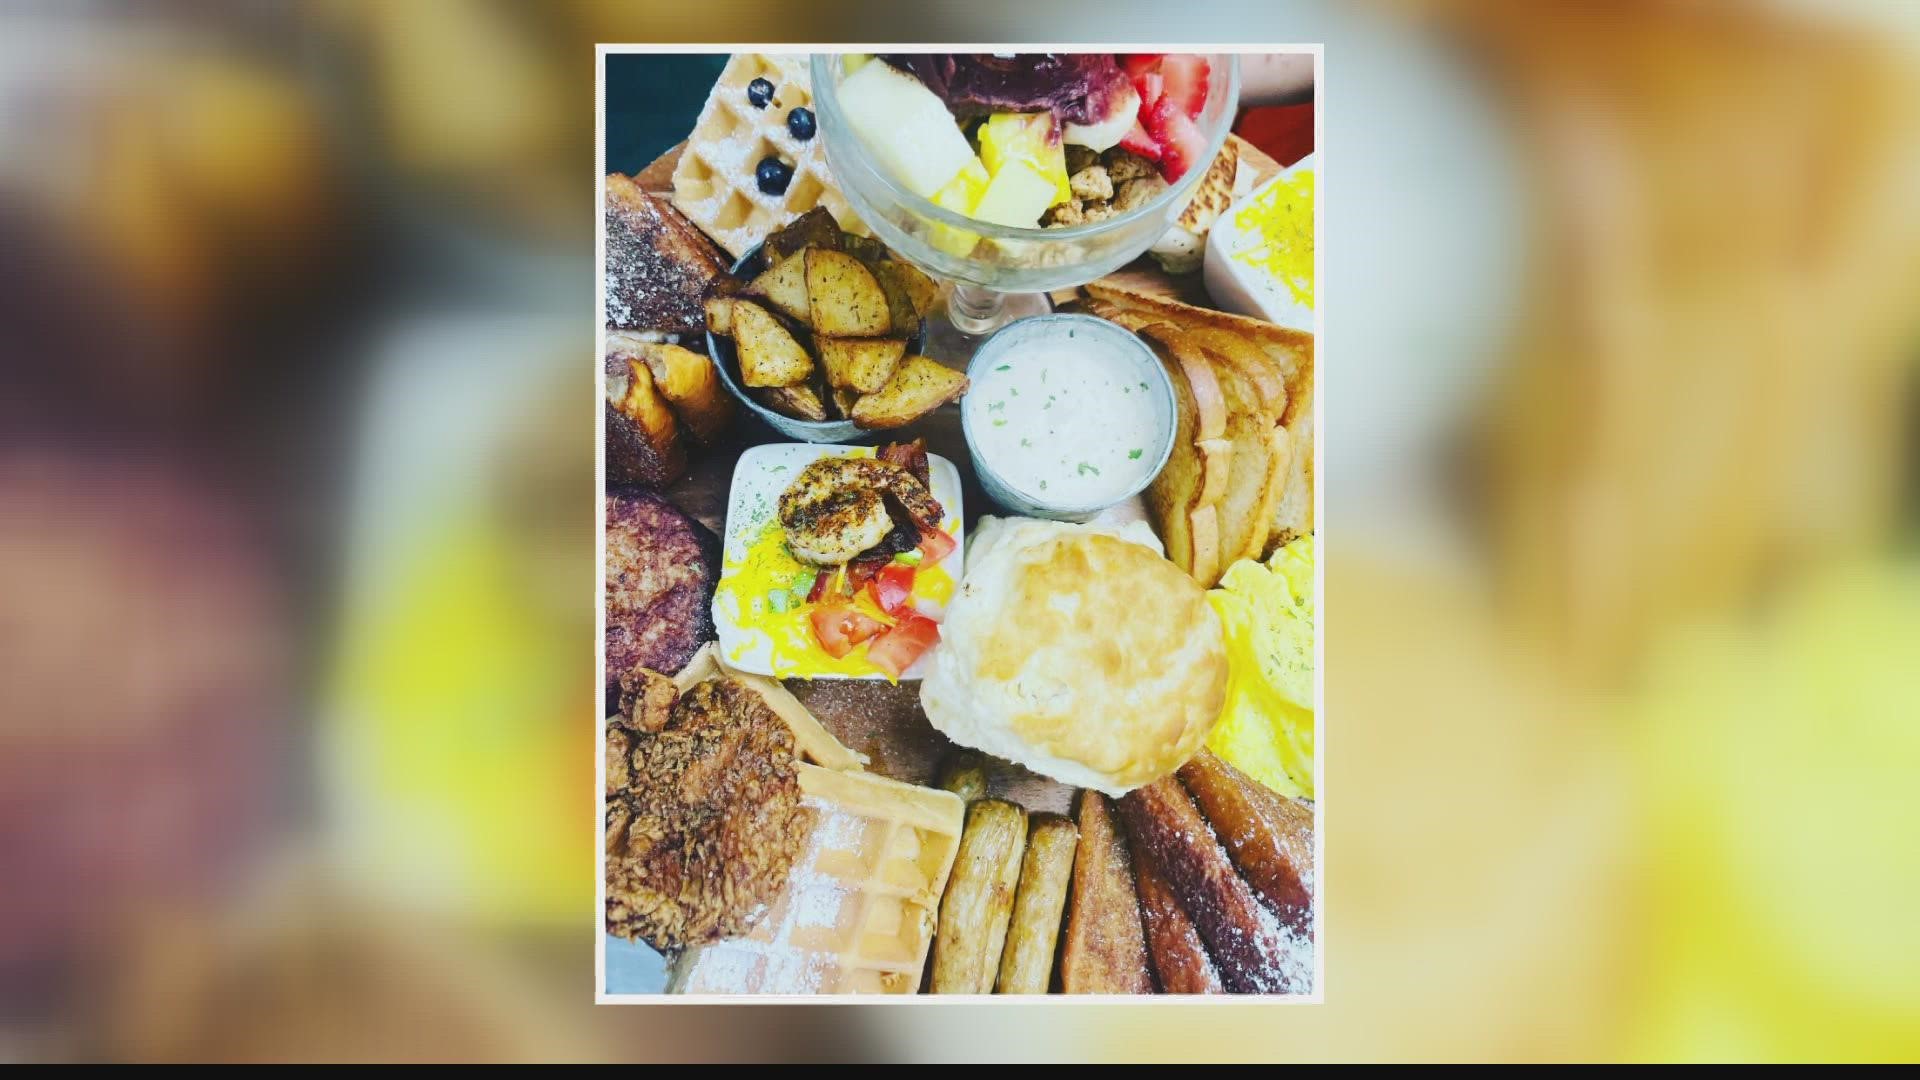 Tulua Bistro is known for its breakfast boards.